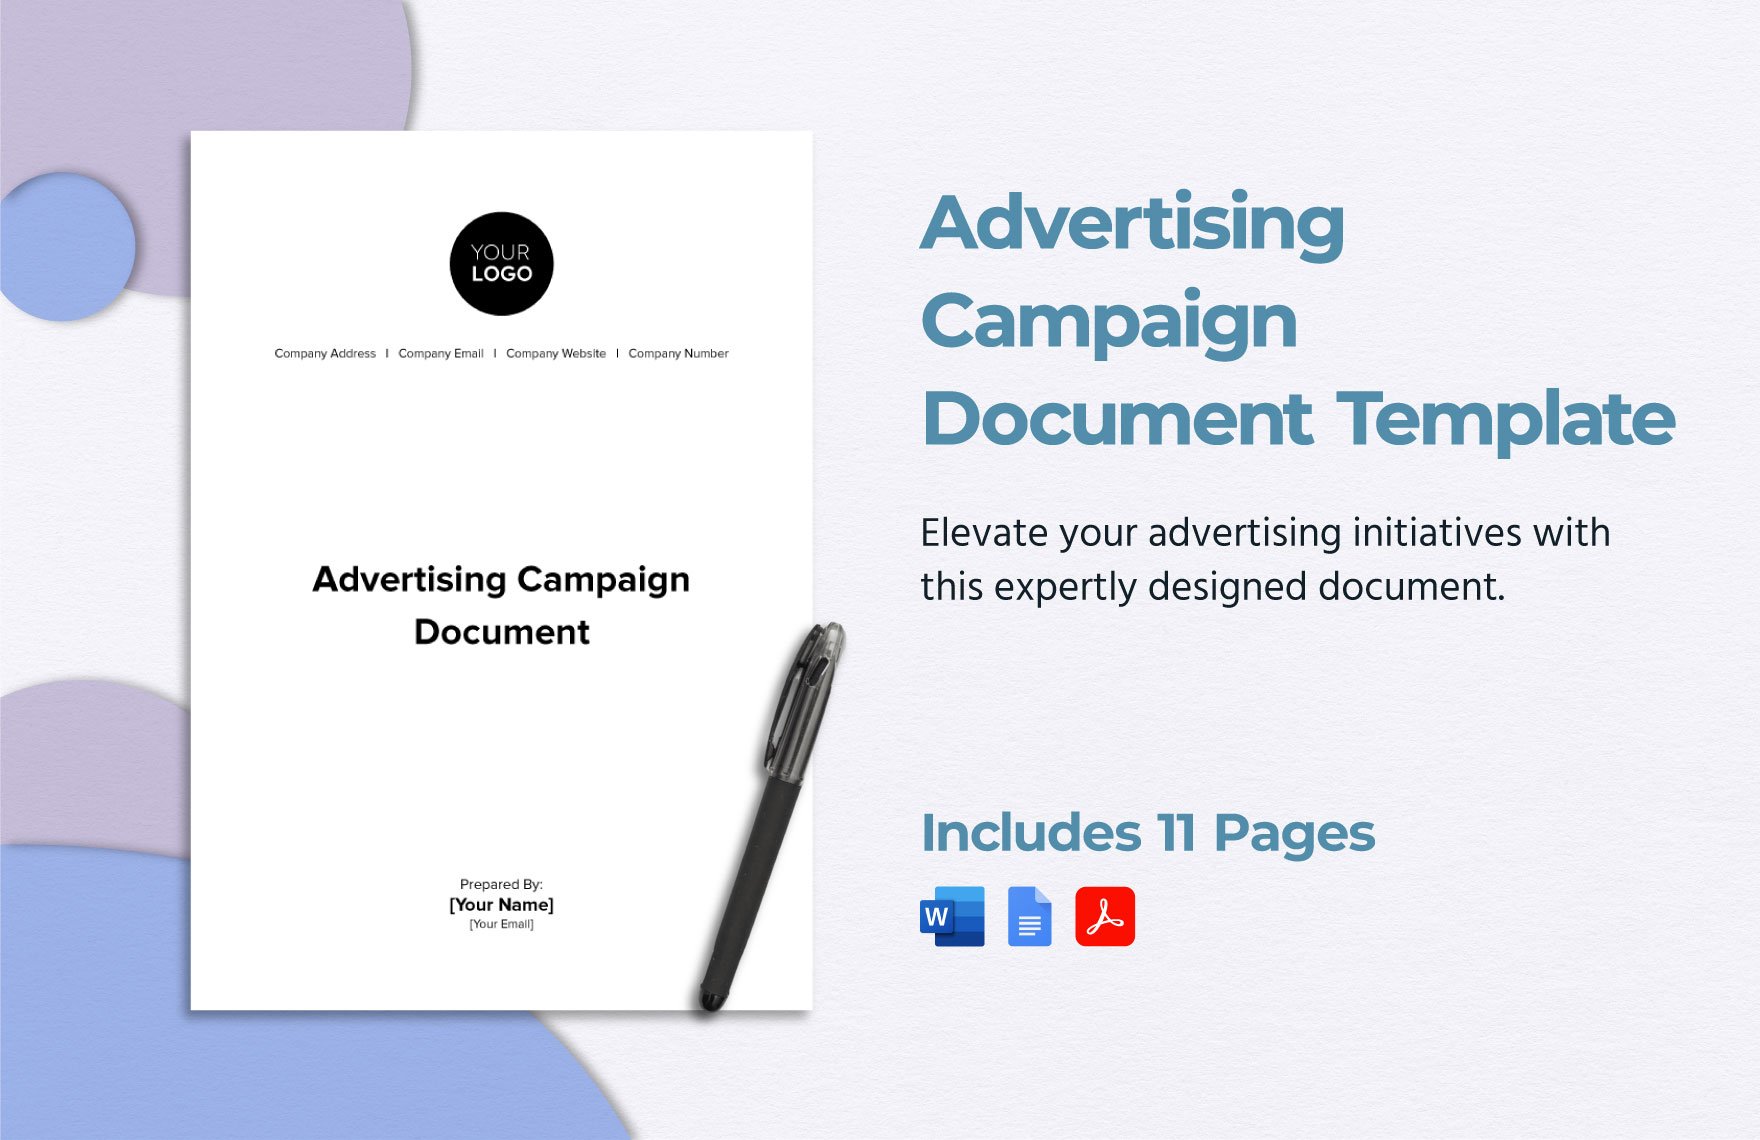 Advertising Campaign Document Template in Word, Google Docs, PDF